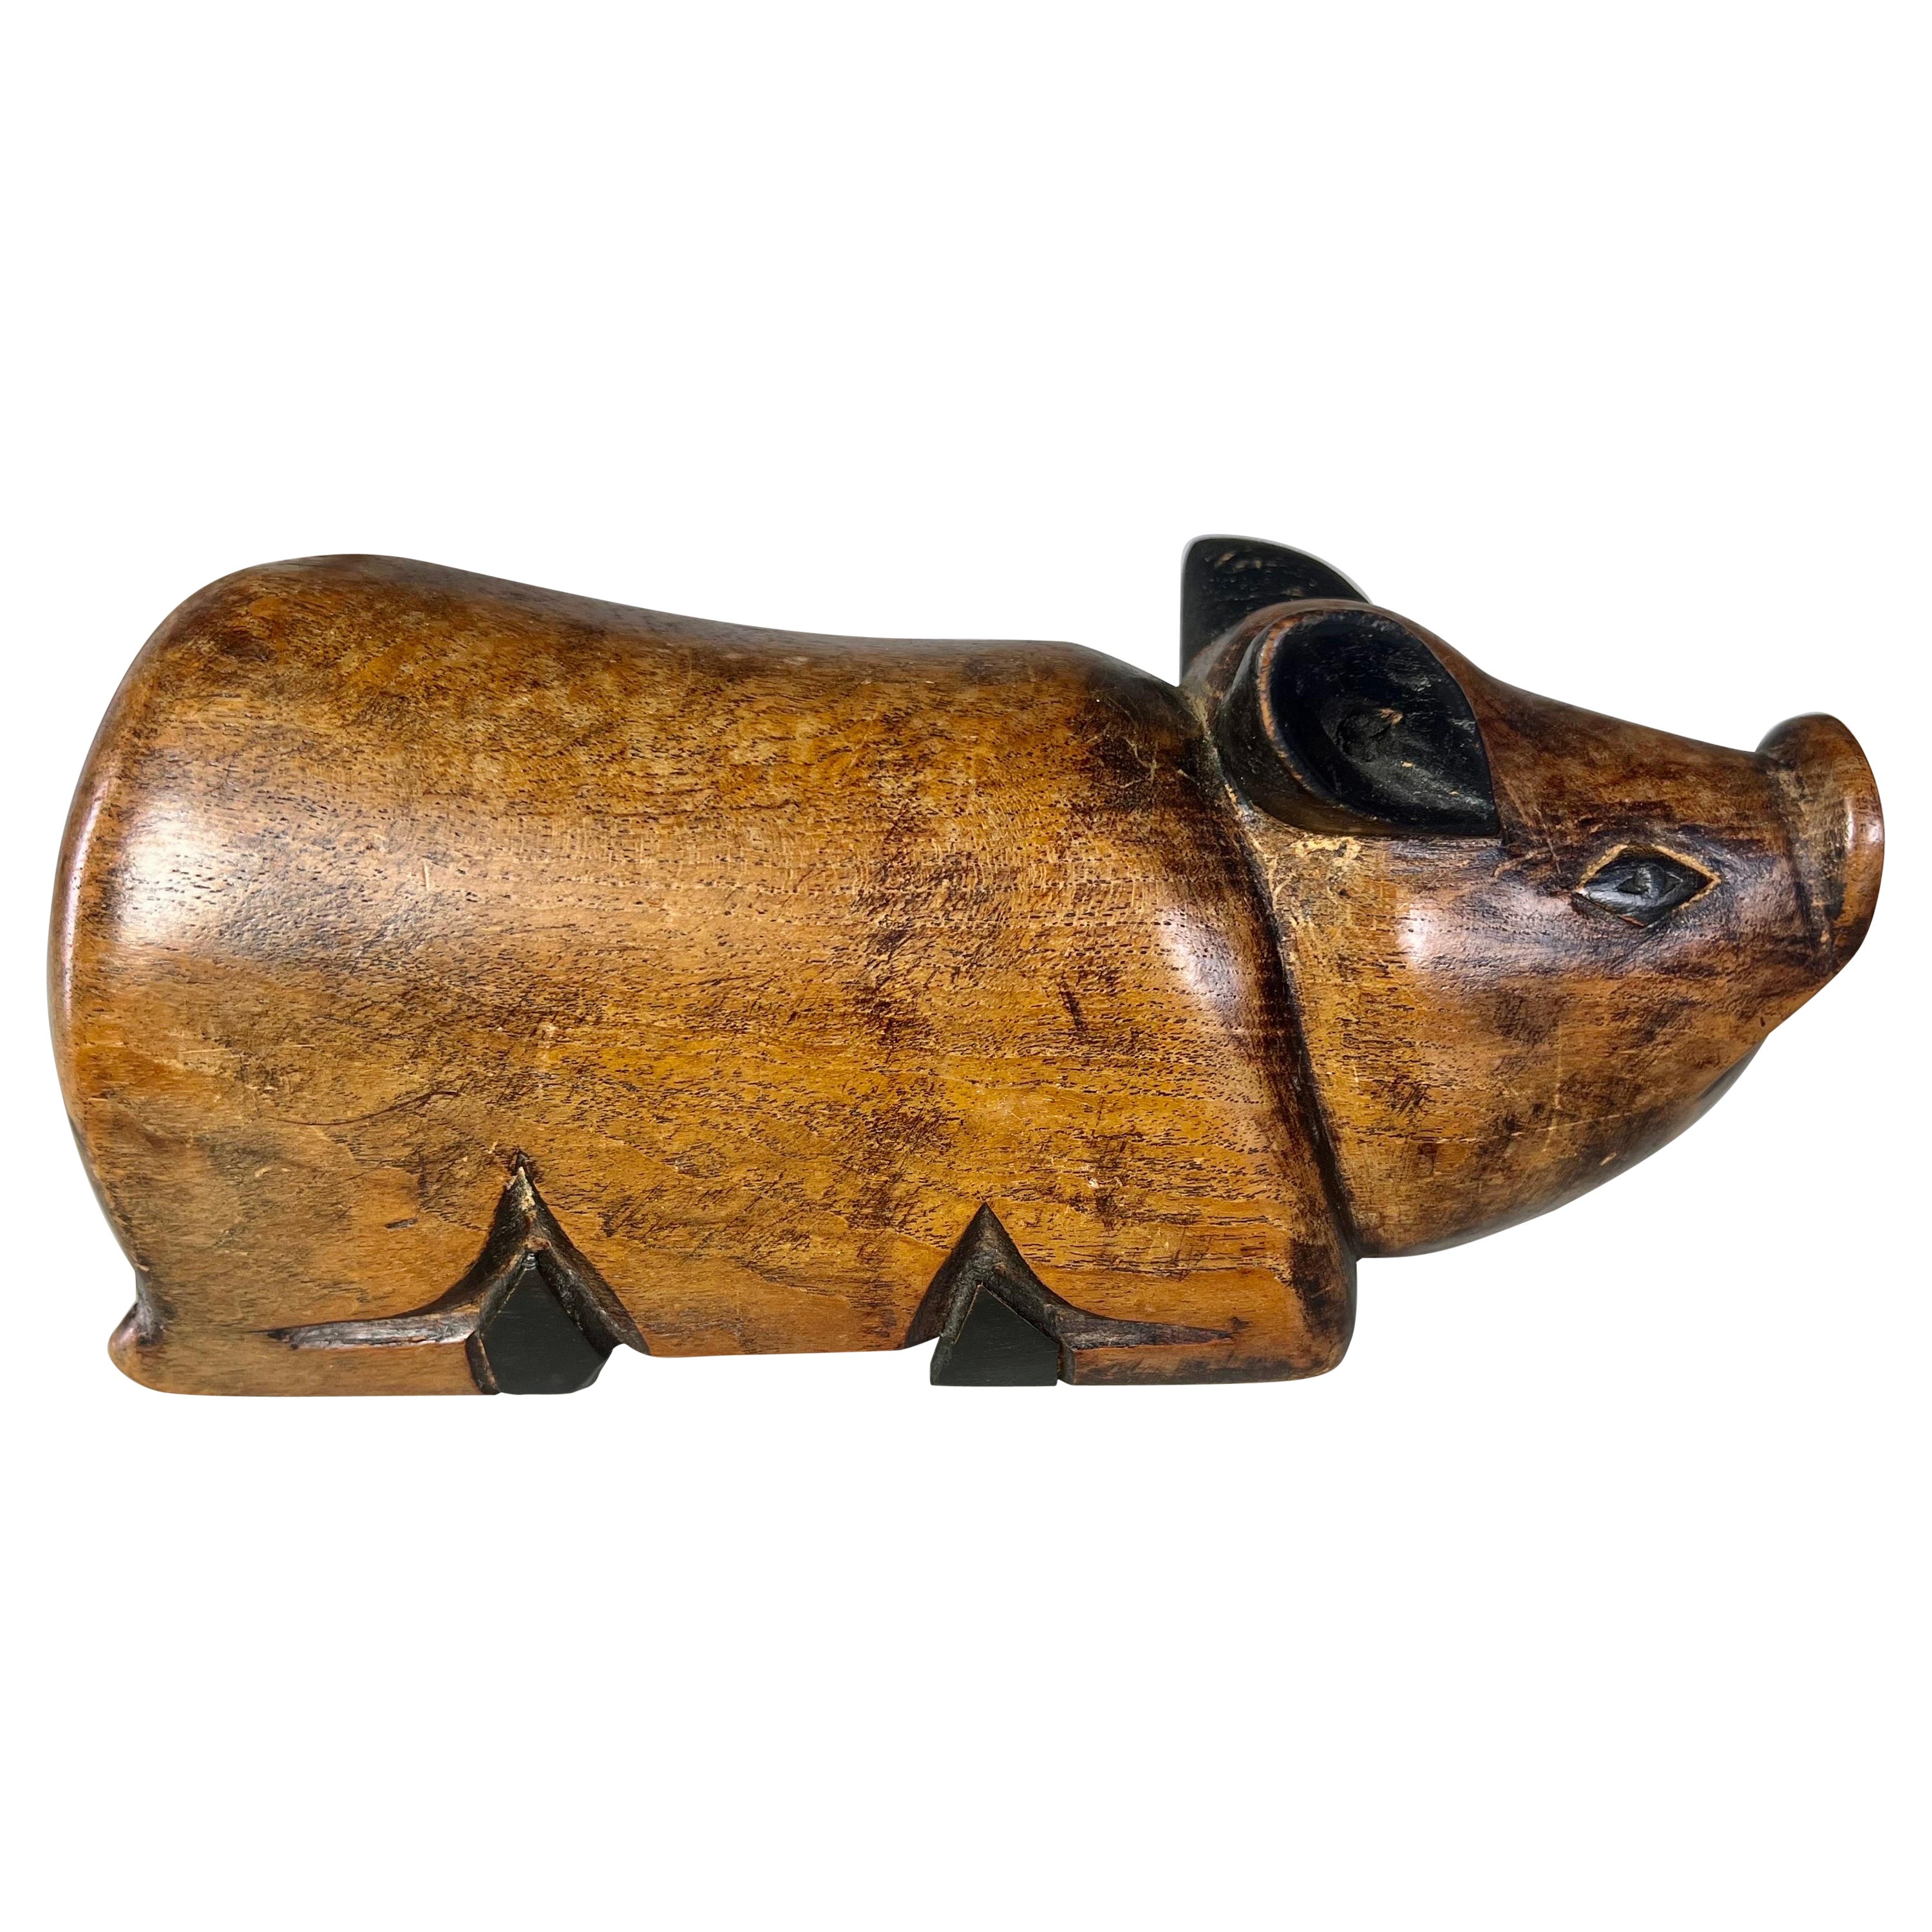 19th Century English Pig Shaped Box with Hidden Compartment